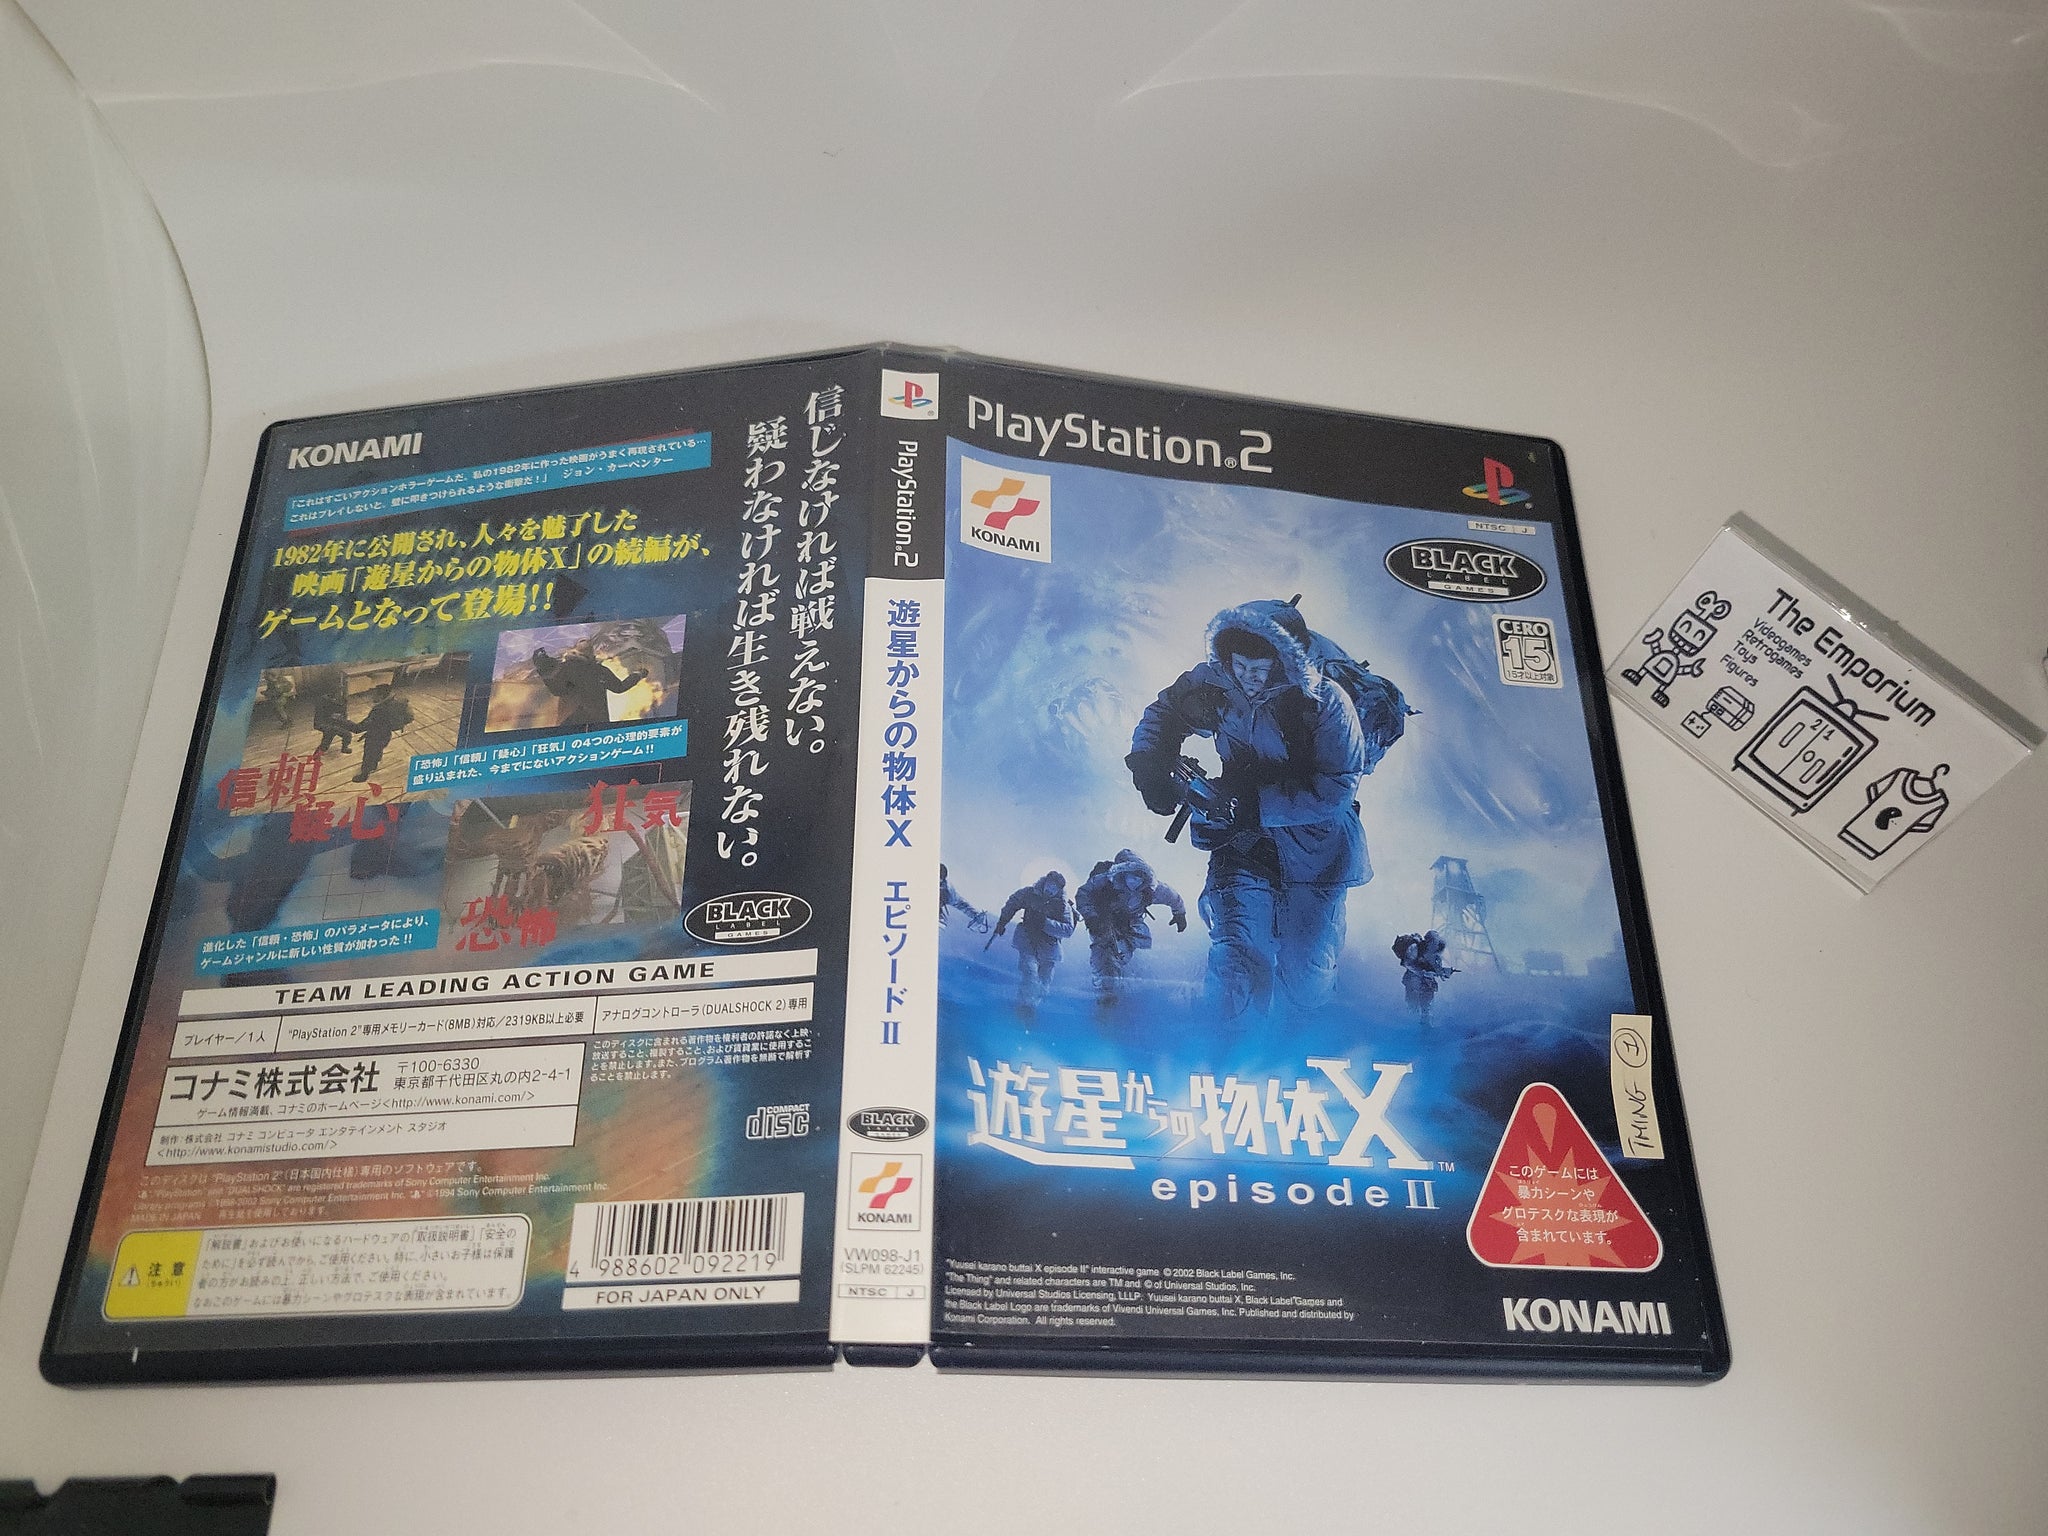 The Thing - Sony playstation 2